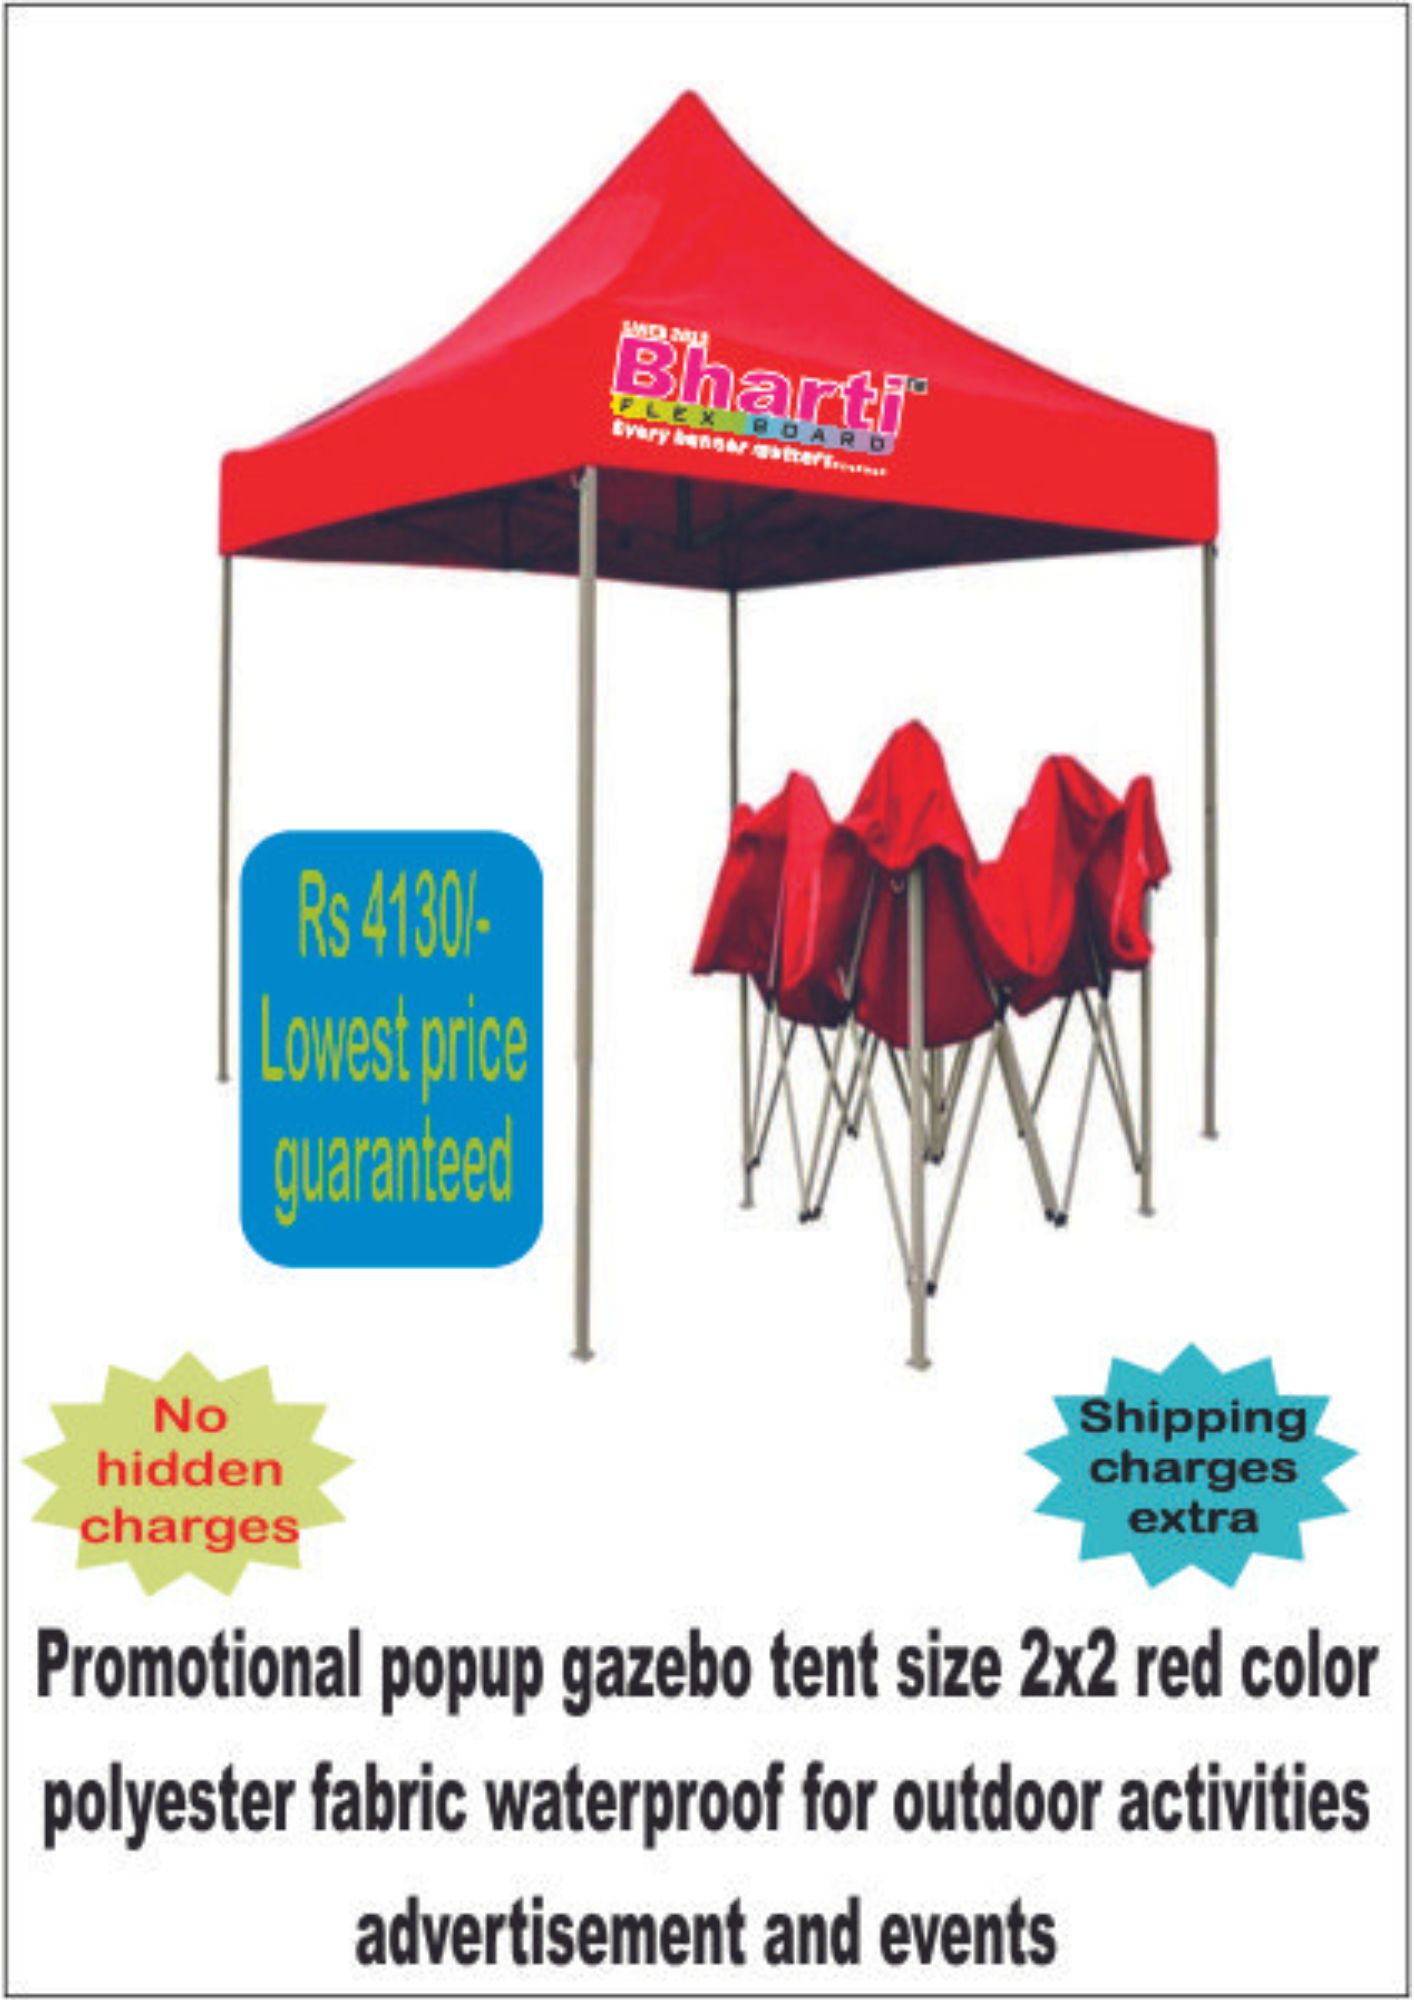 Gazebo Tent red size 2x2 meters portable and foldable pop-up